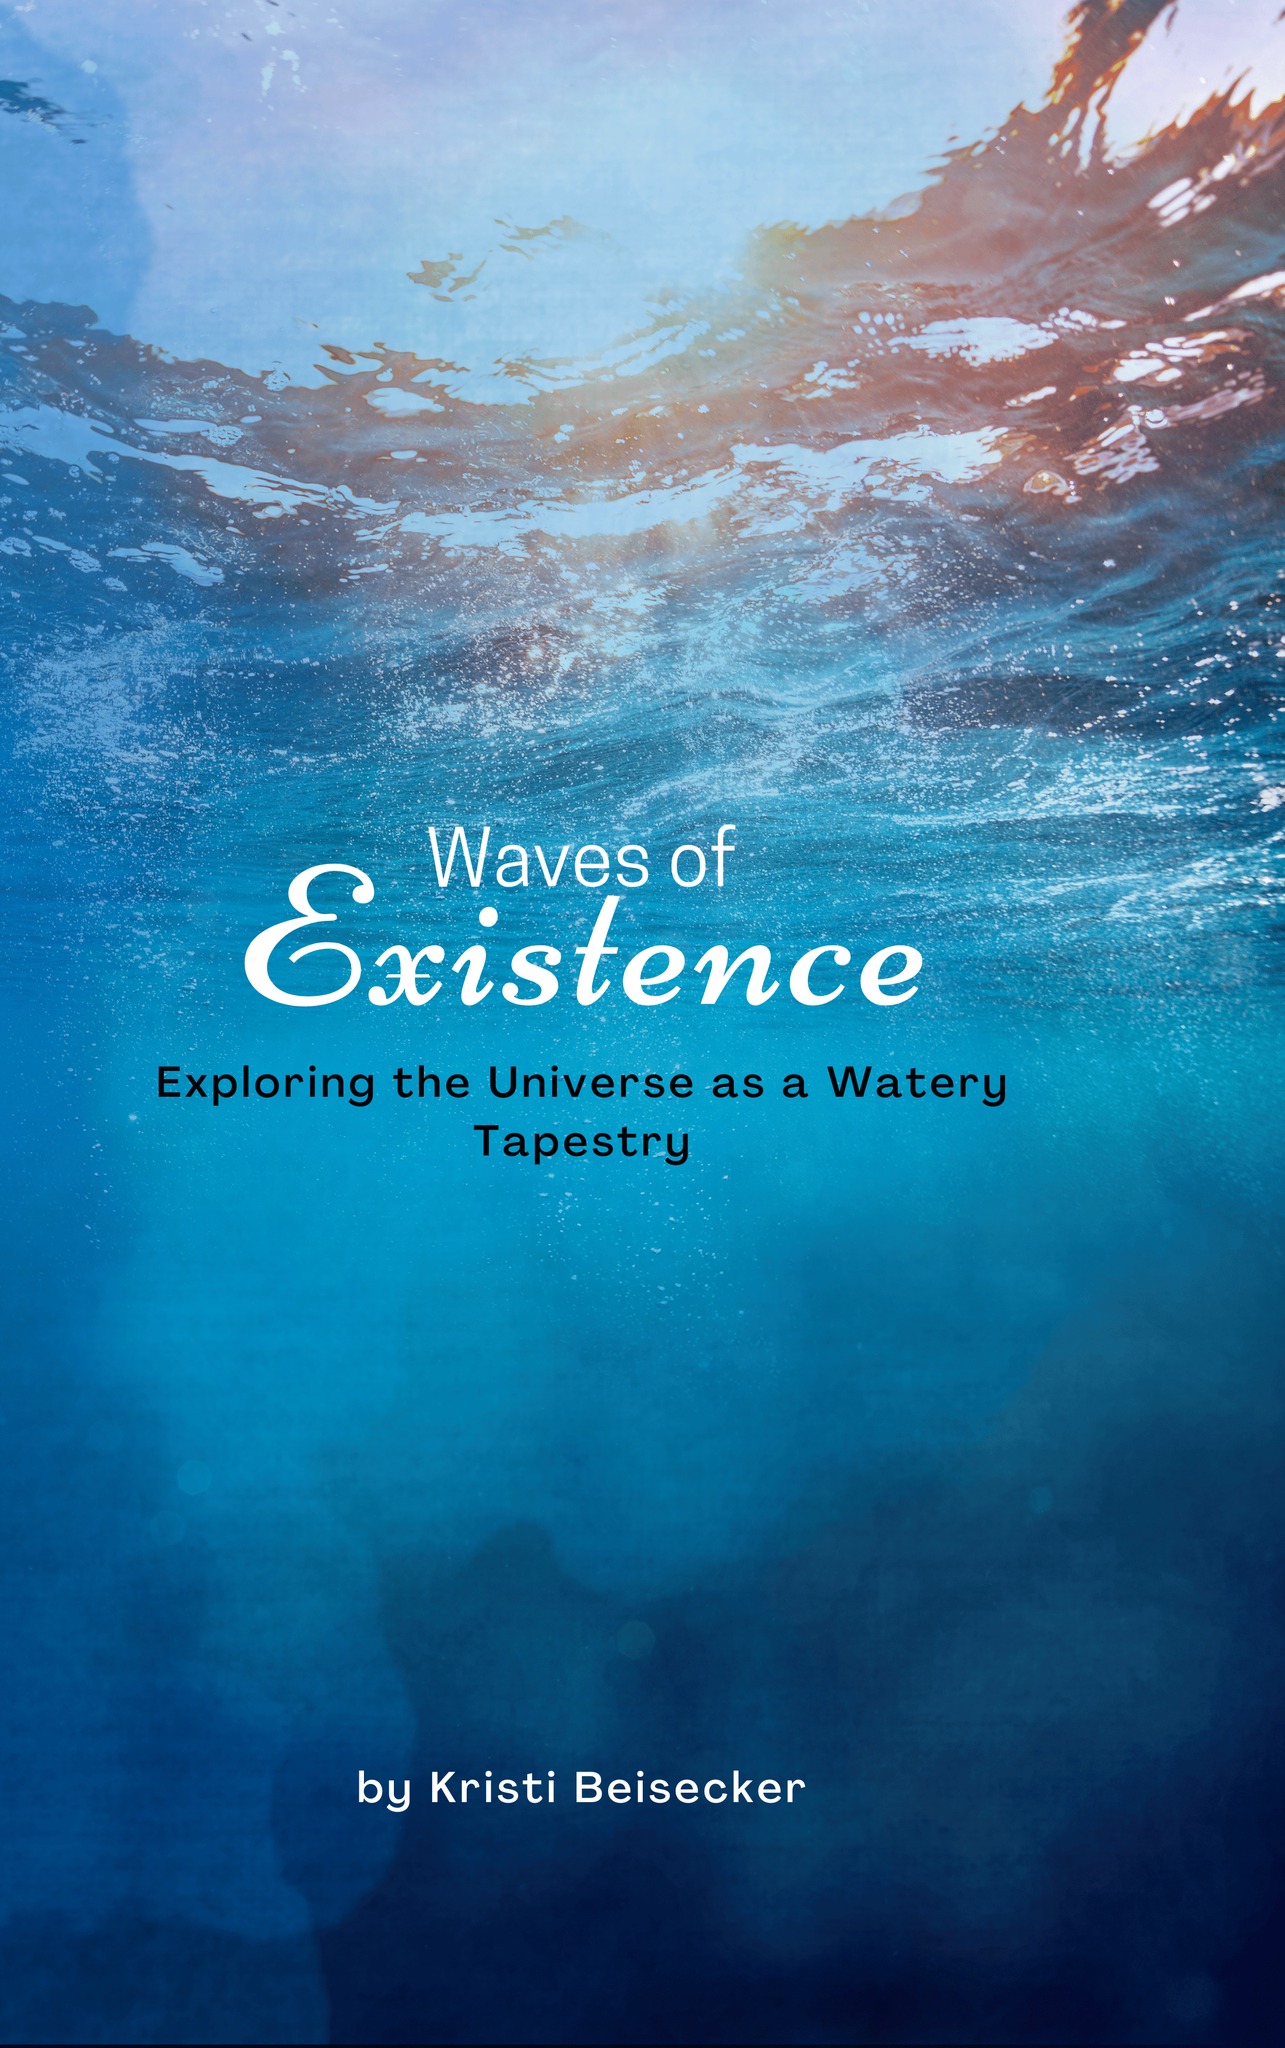 Waves of Existence: Exploring the Universe as a Watery Tapestry